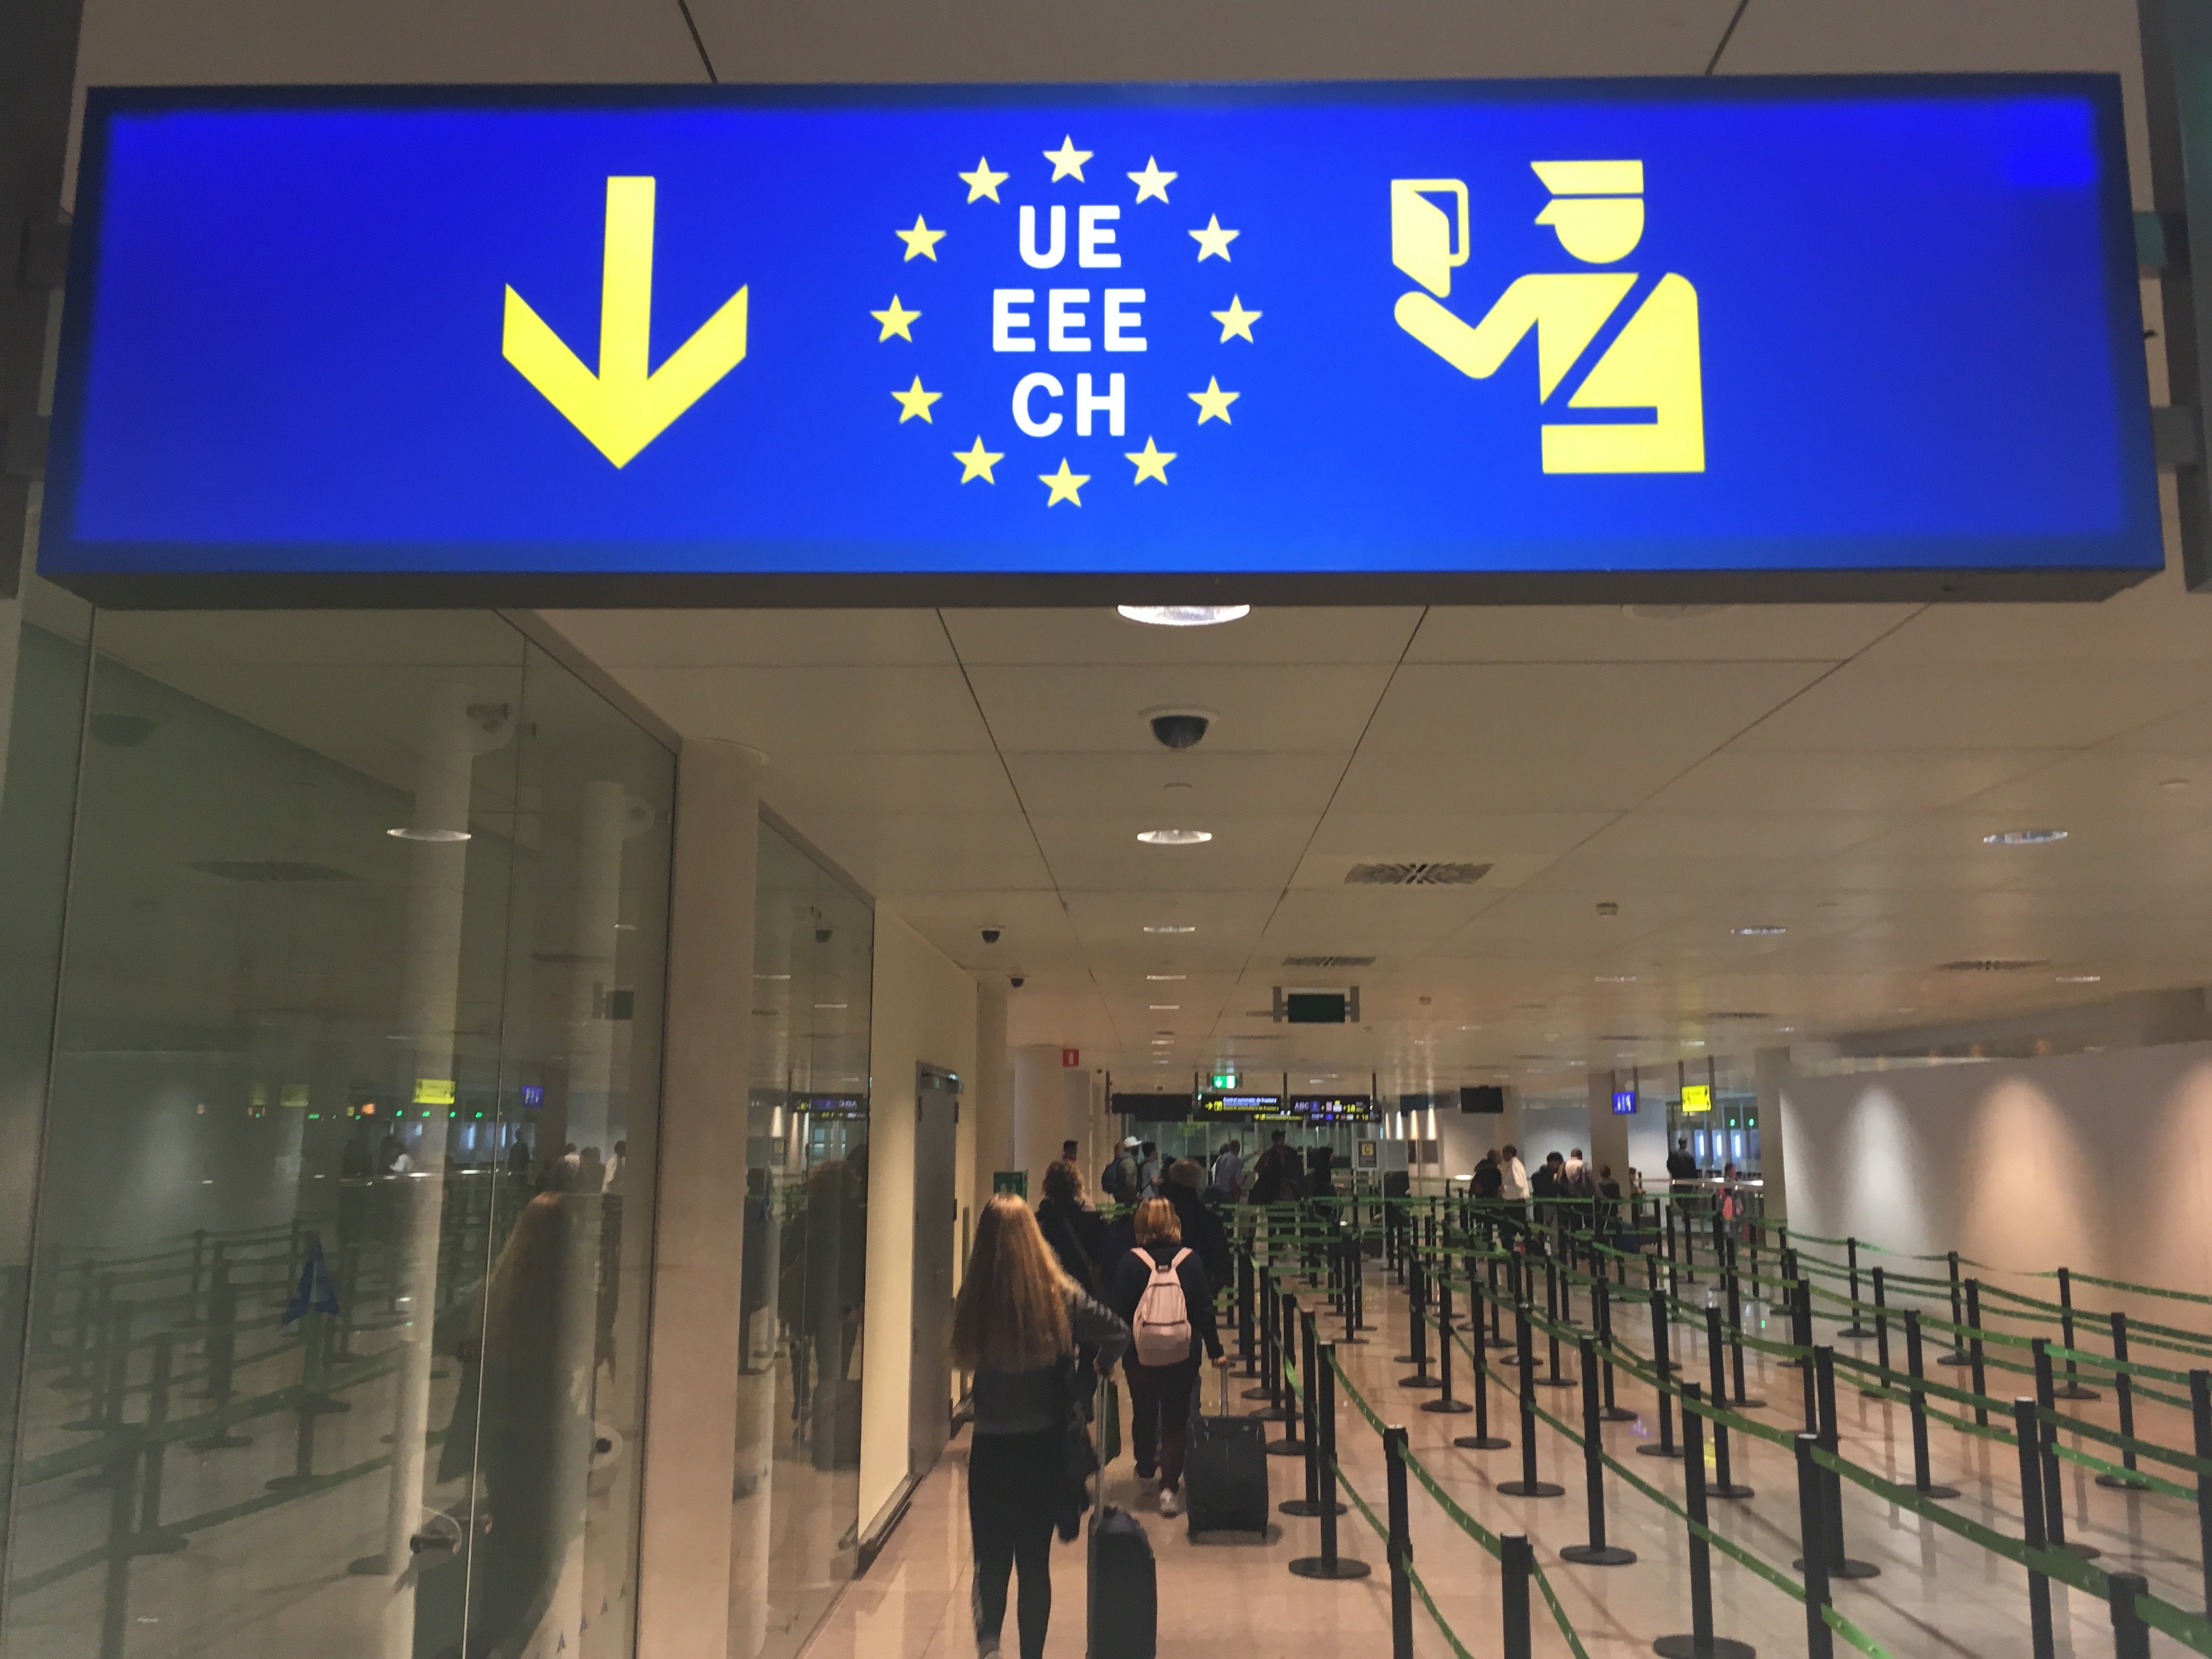 Line up: From 1 January 2021, British visitors to the European Union will not be able to use the fast-track passport queues